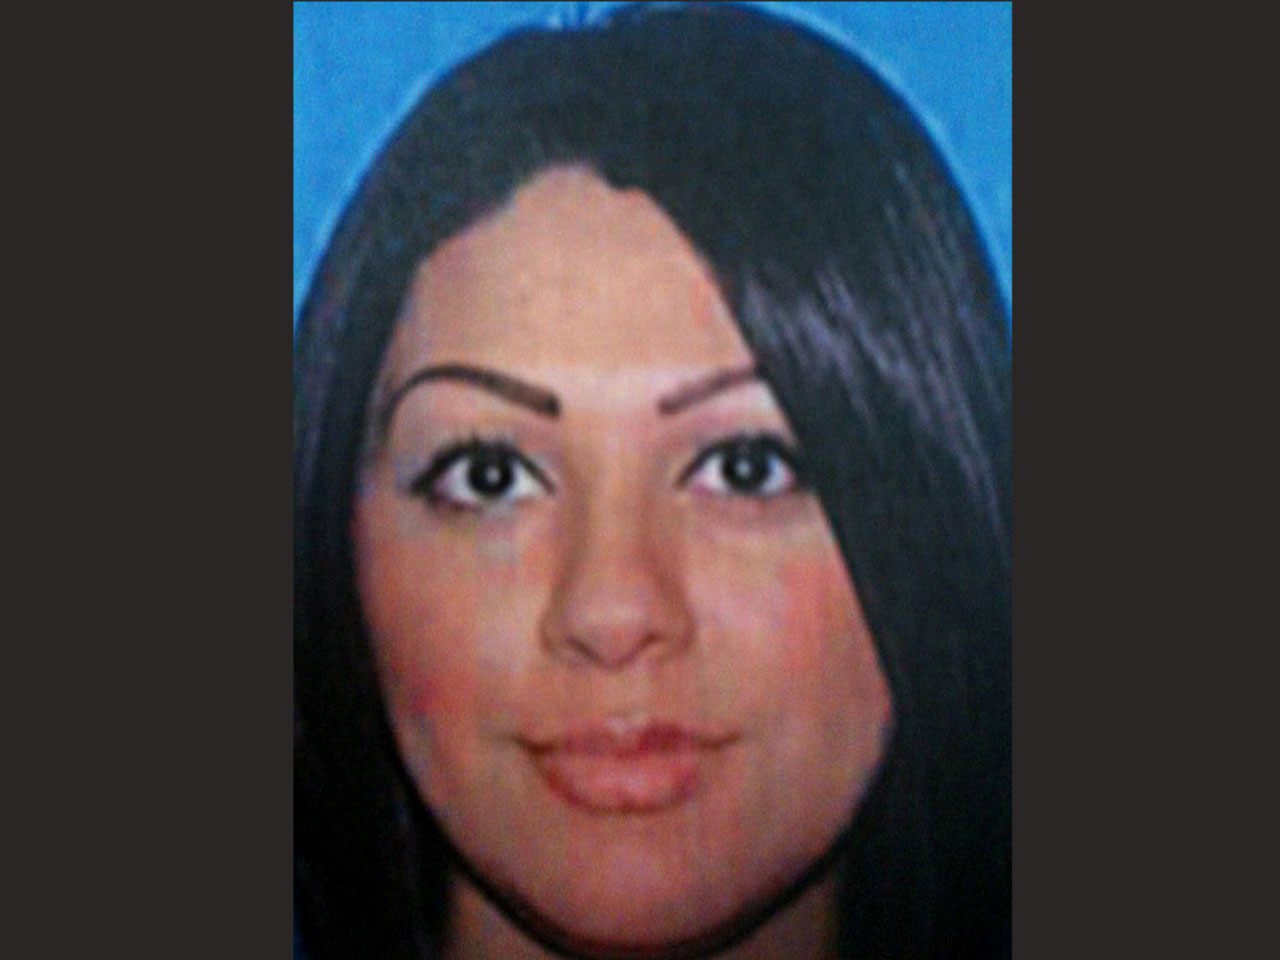 Police find video of Fresno mother who killed kids, self, smoking meth before massacre picture